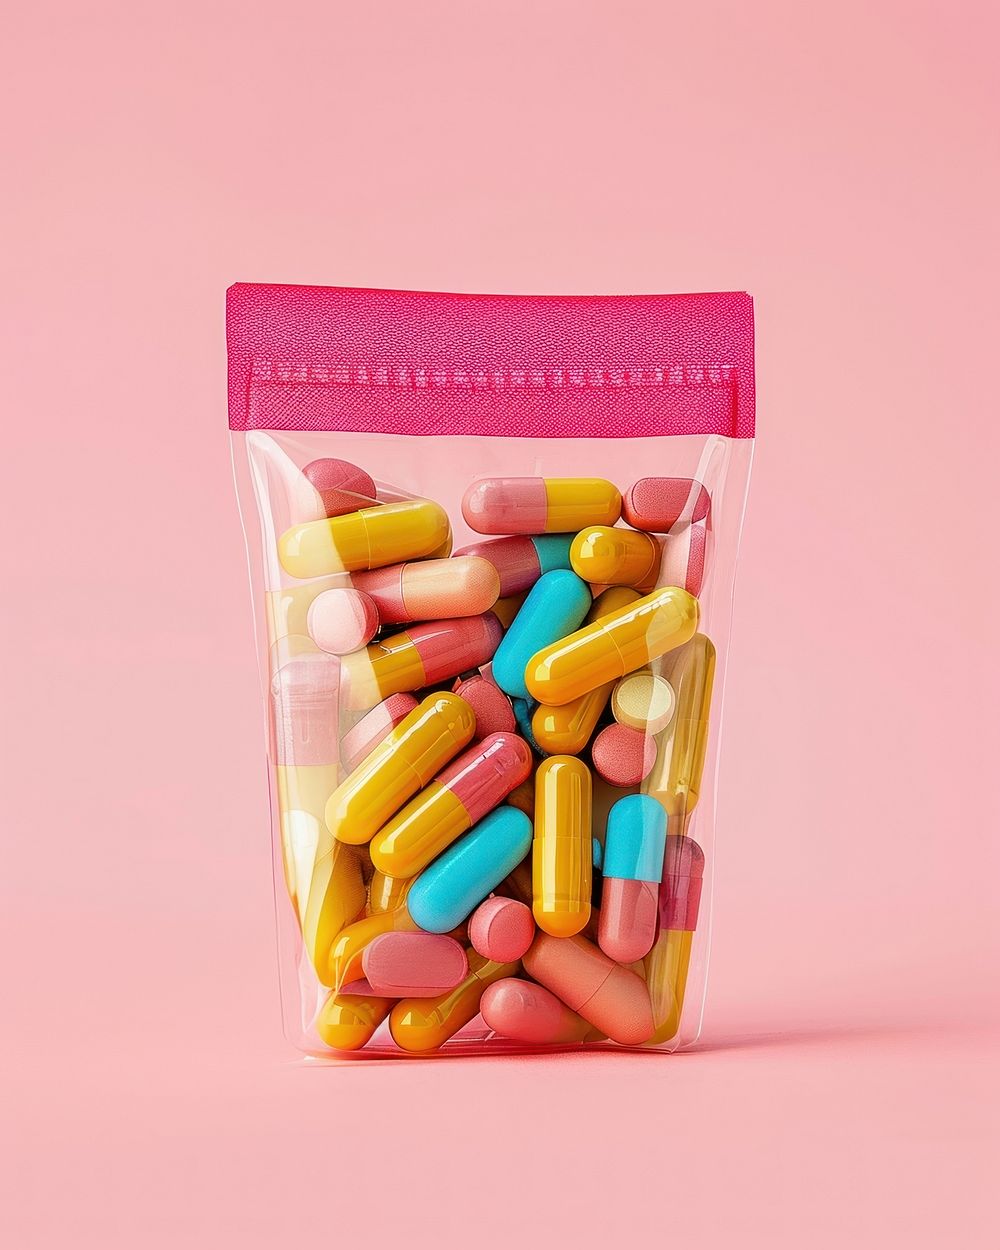 Pill white background confectionery medication.